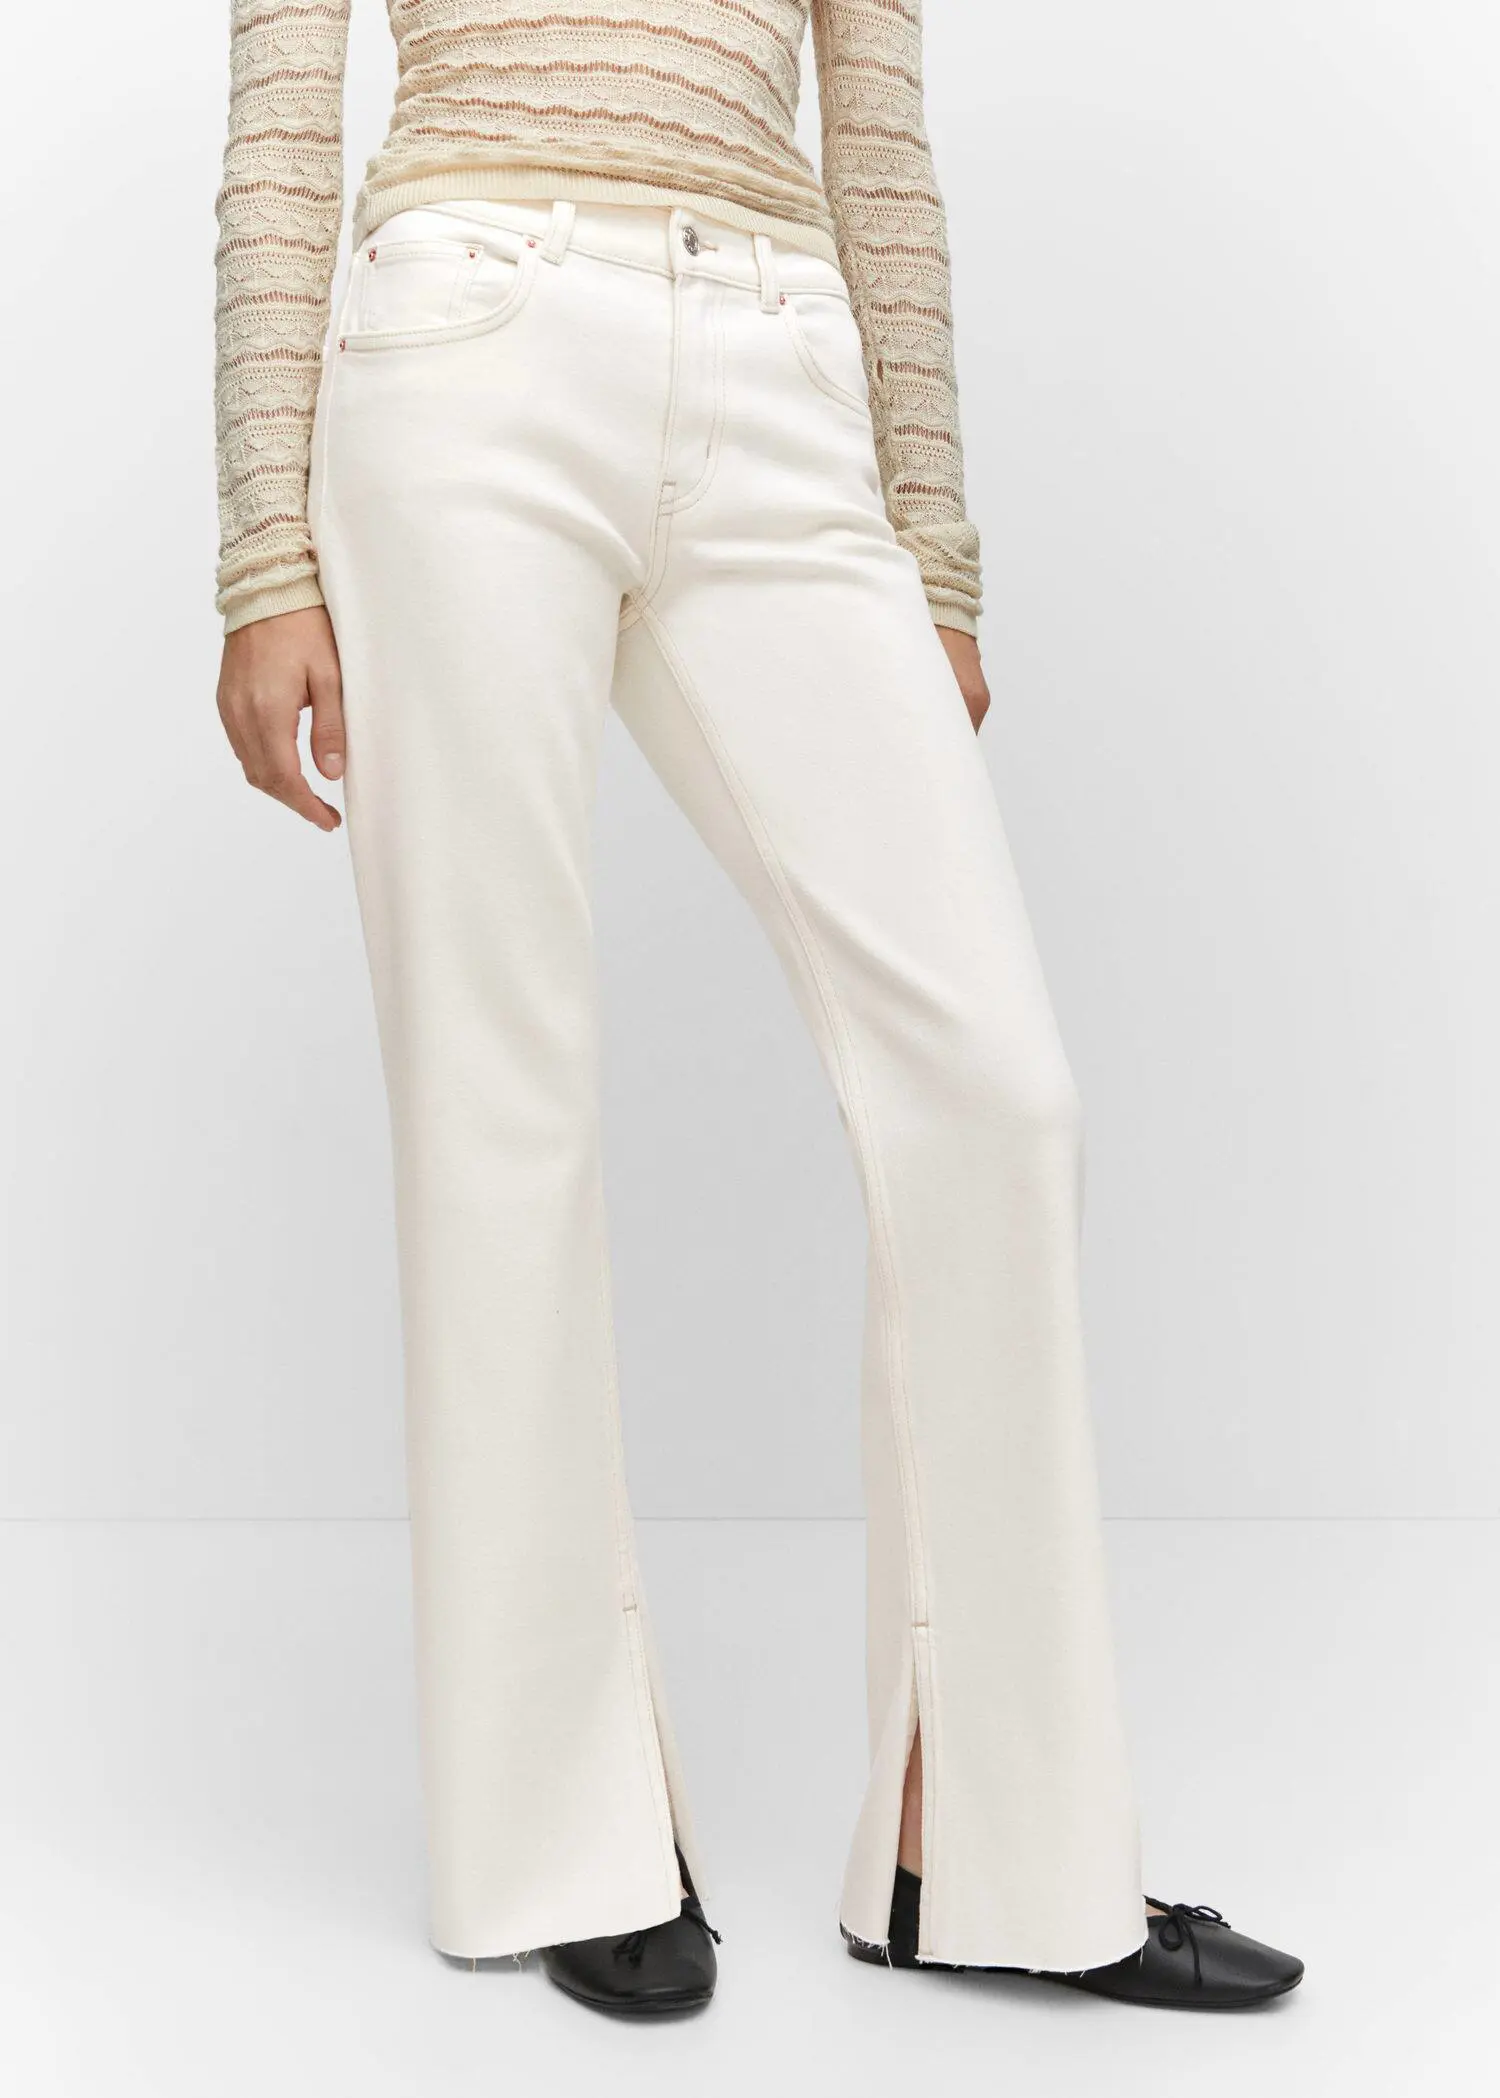 Mango Medium-rise straight jeans with slits. a woman in white pants and a long sleeve shirt. 